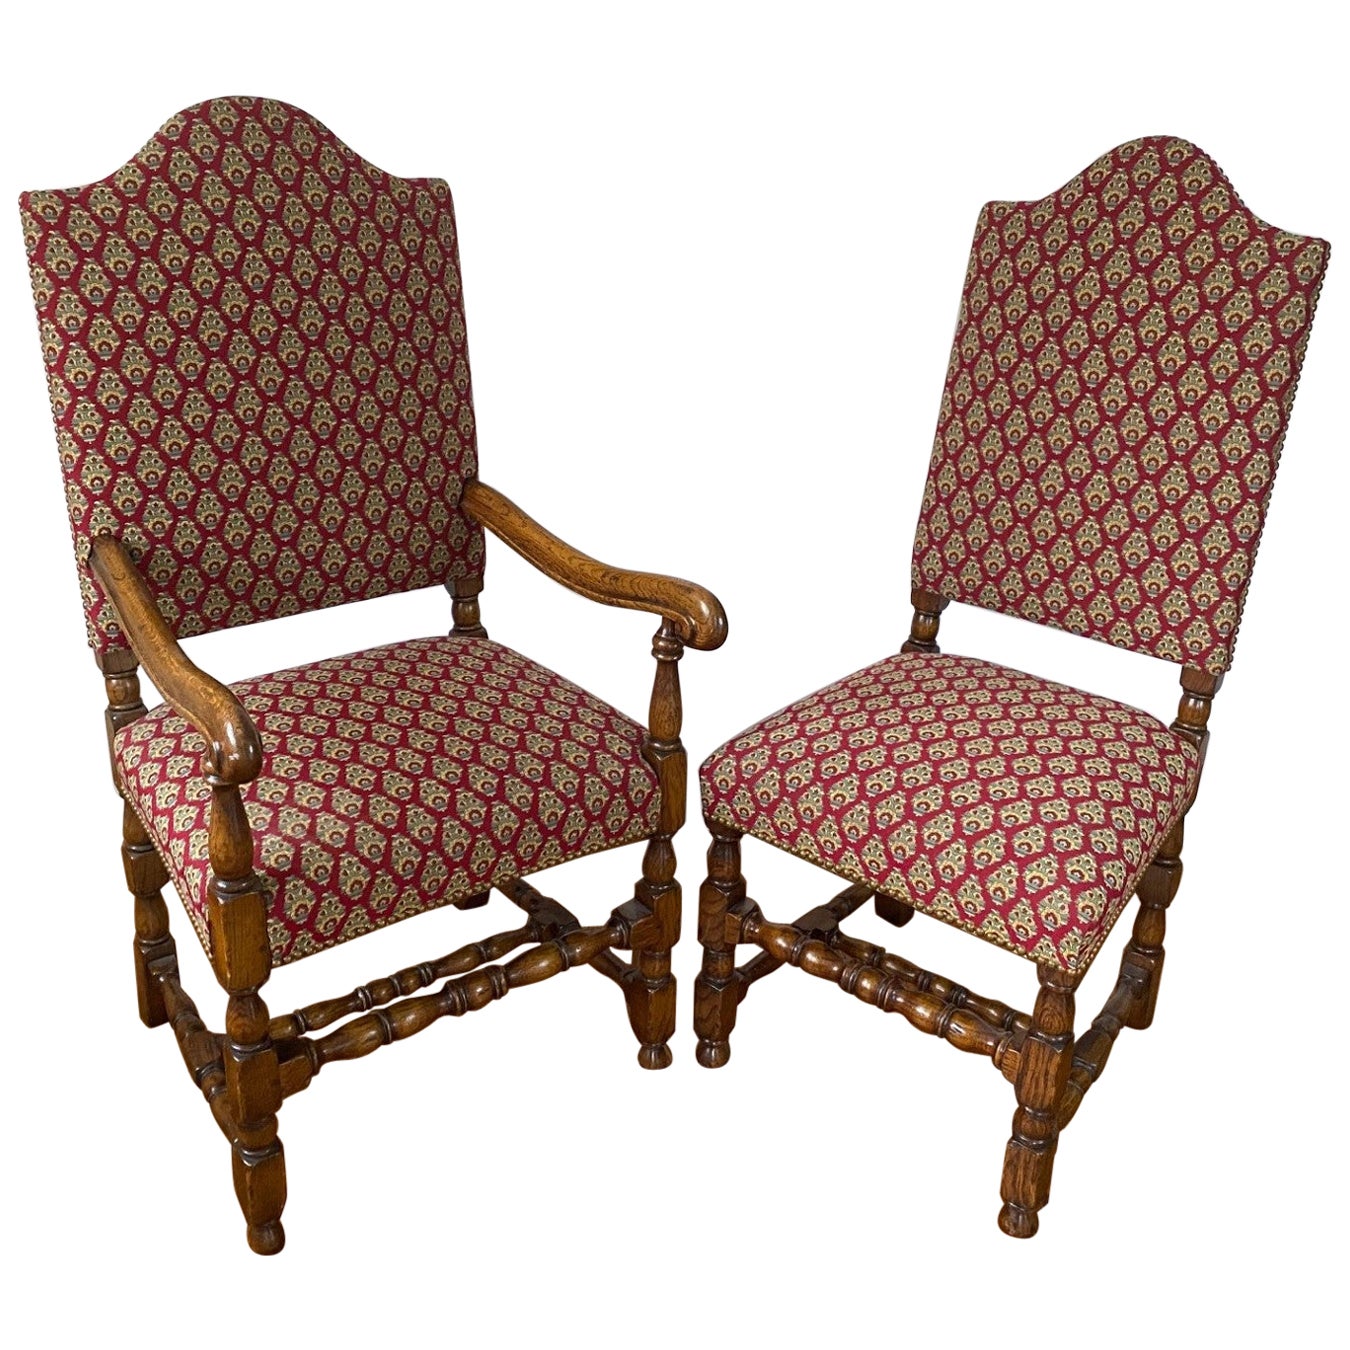 English-Made Late 17th Century Style Solid Oak High Back Side & Arm Chair For Sale